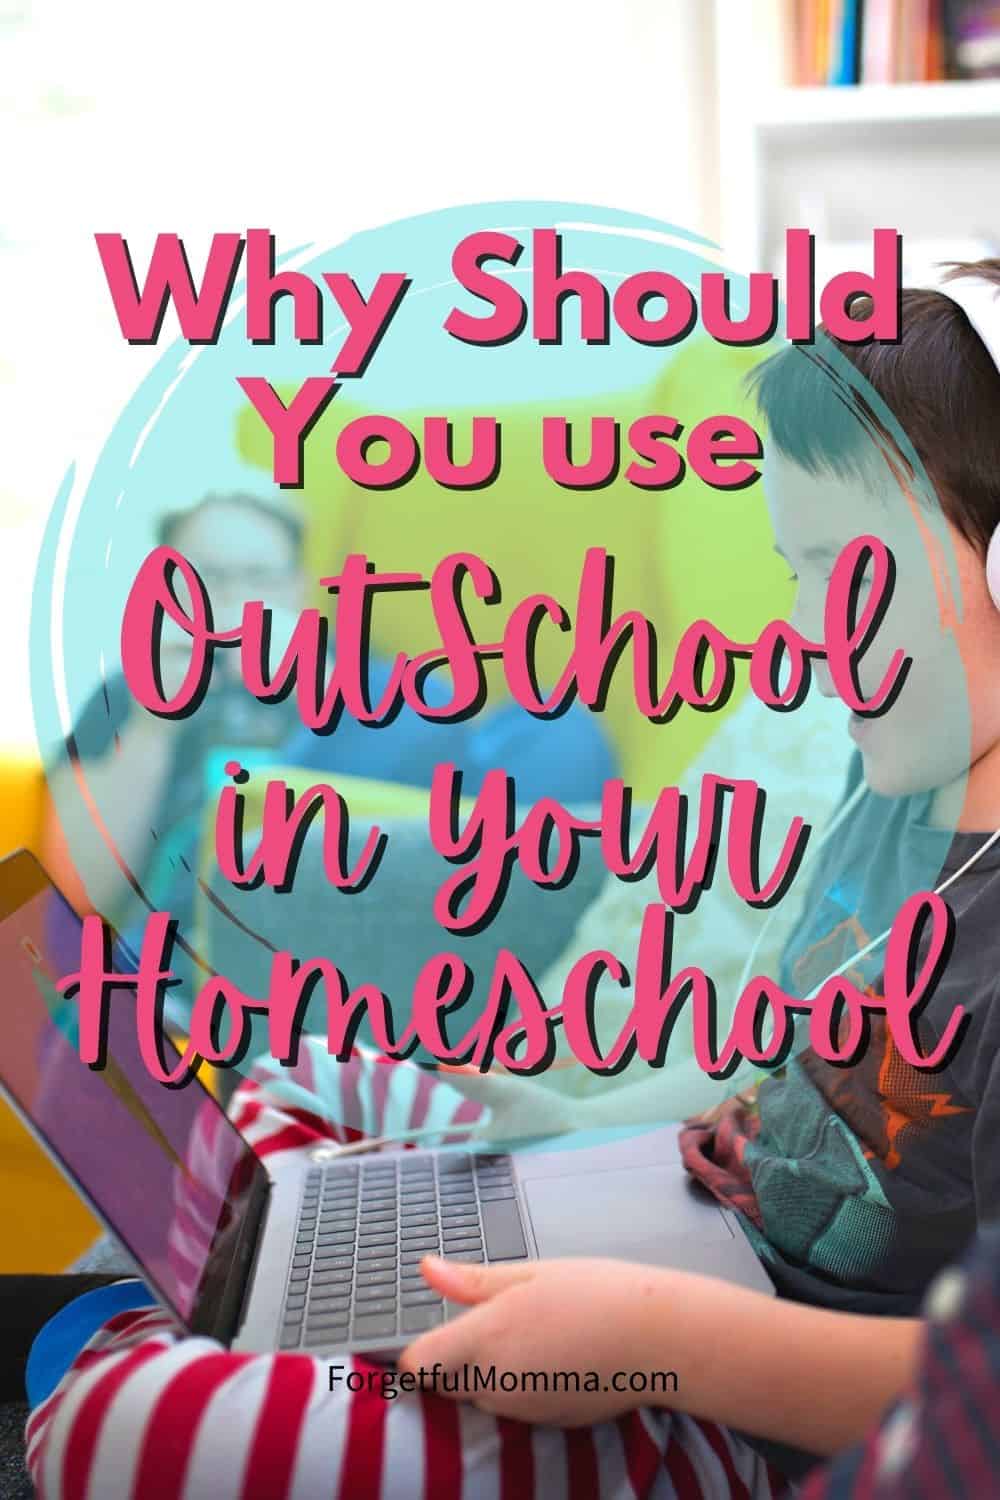 Why Should You use OutSchool in Your Homeschool - child on computer during outschool why mom is sitting back relaxing for one